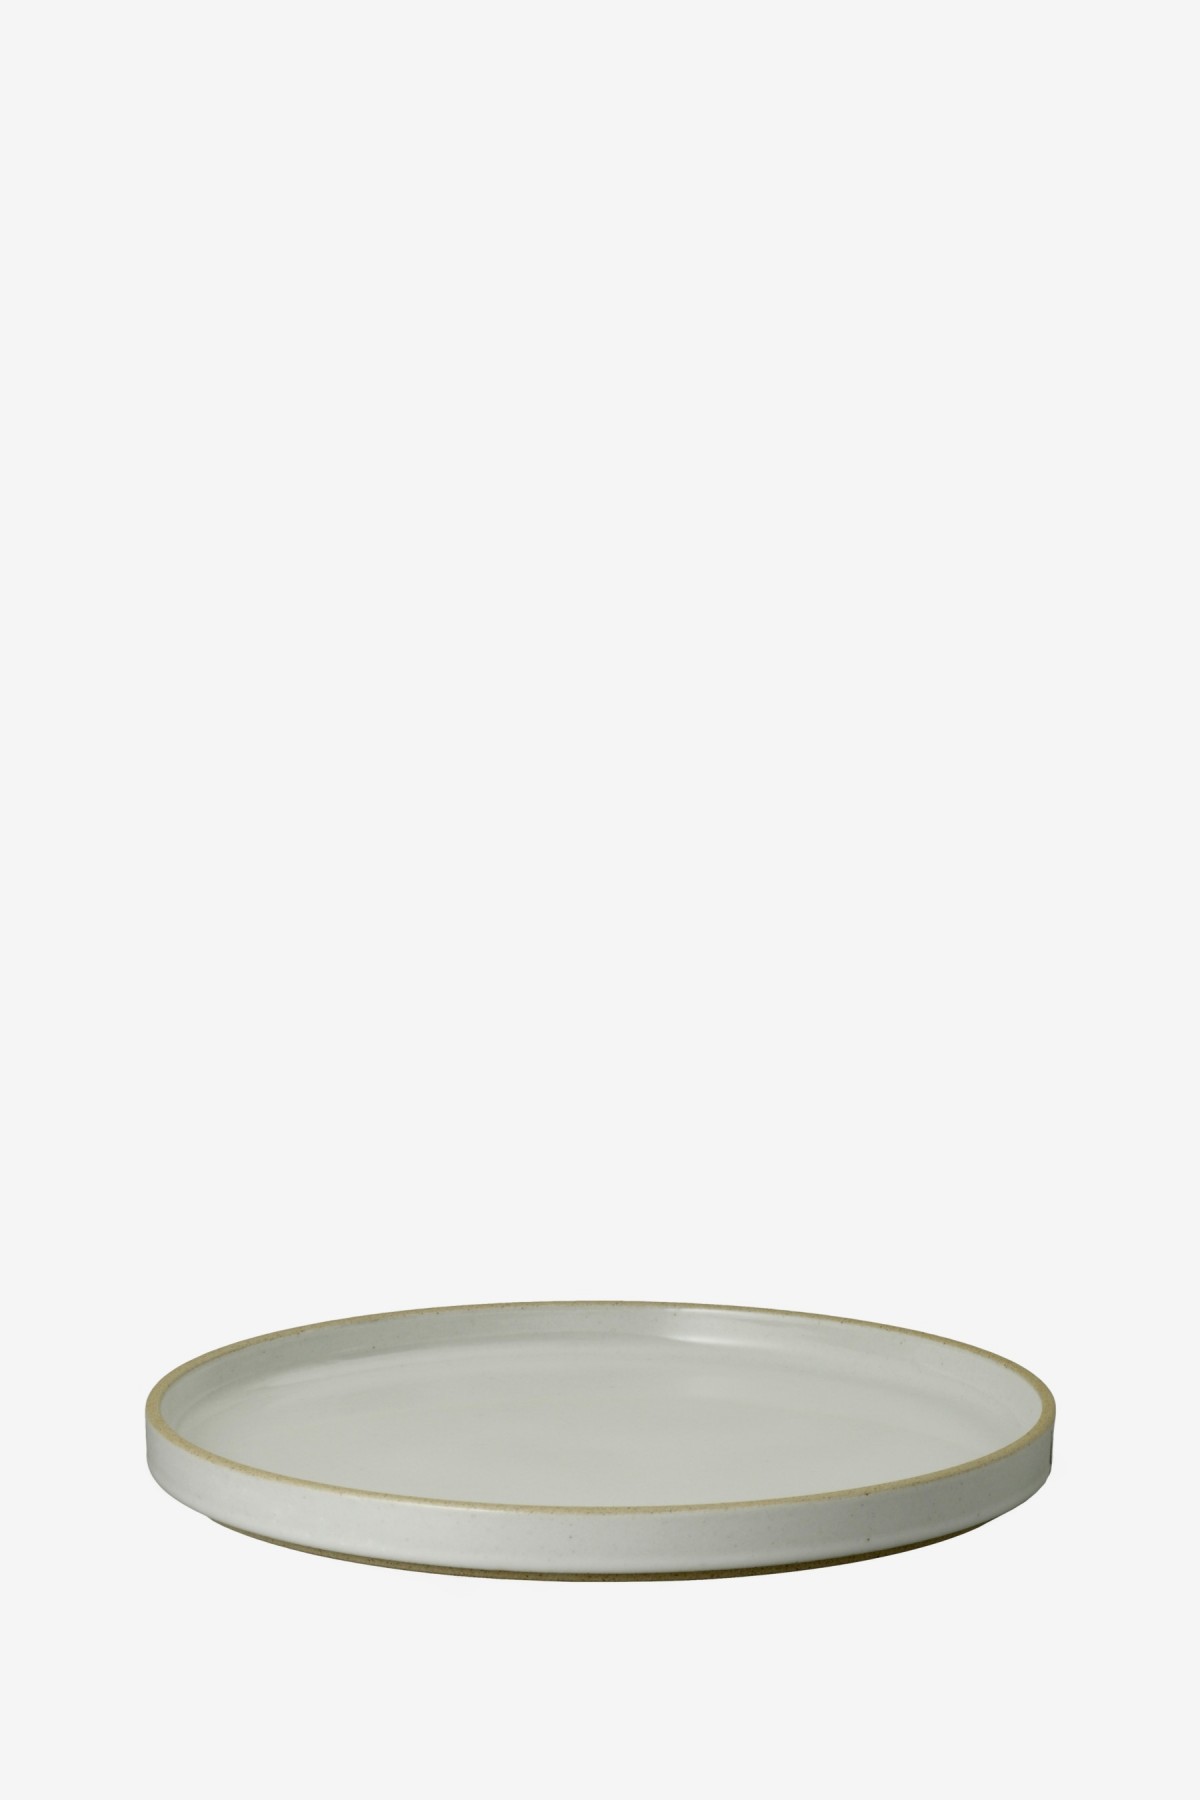 Hasami Porcelain Plate 255×21mm in Clear Grey